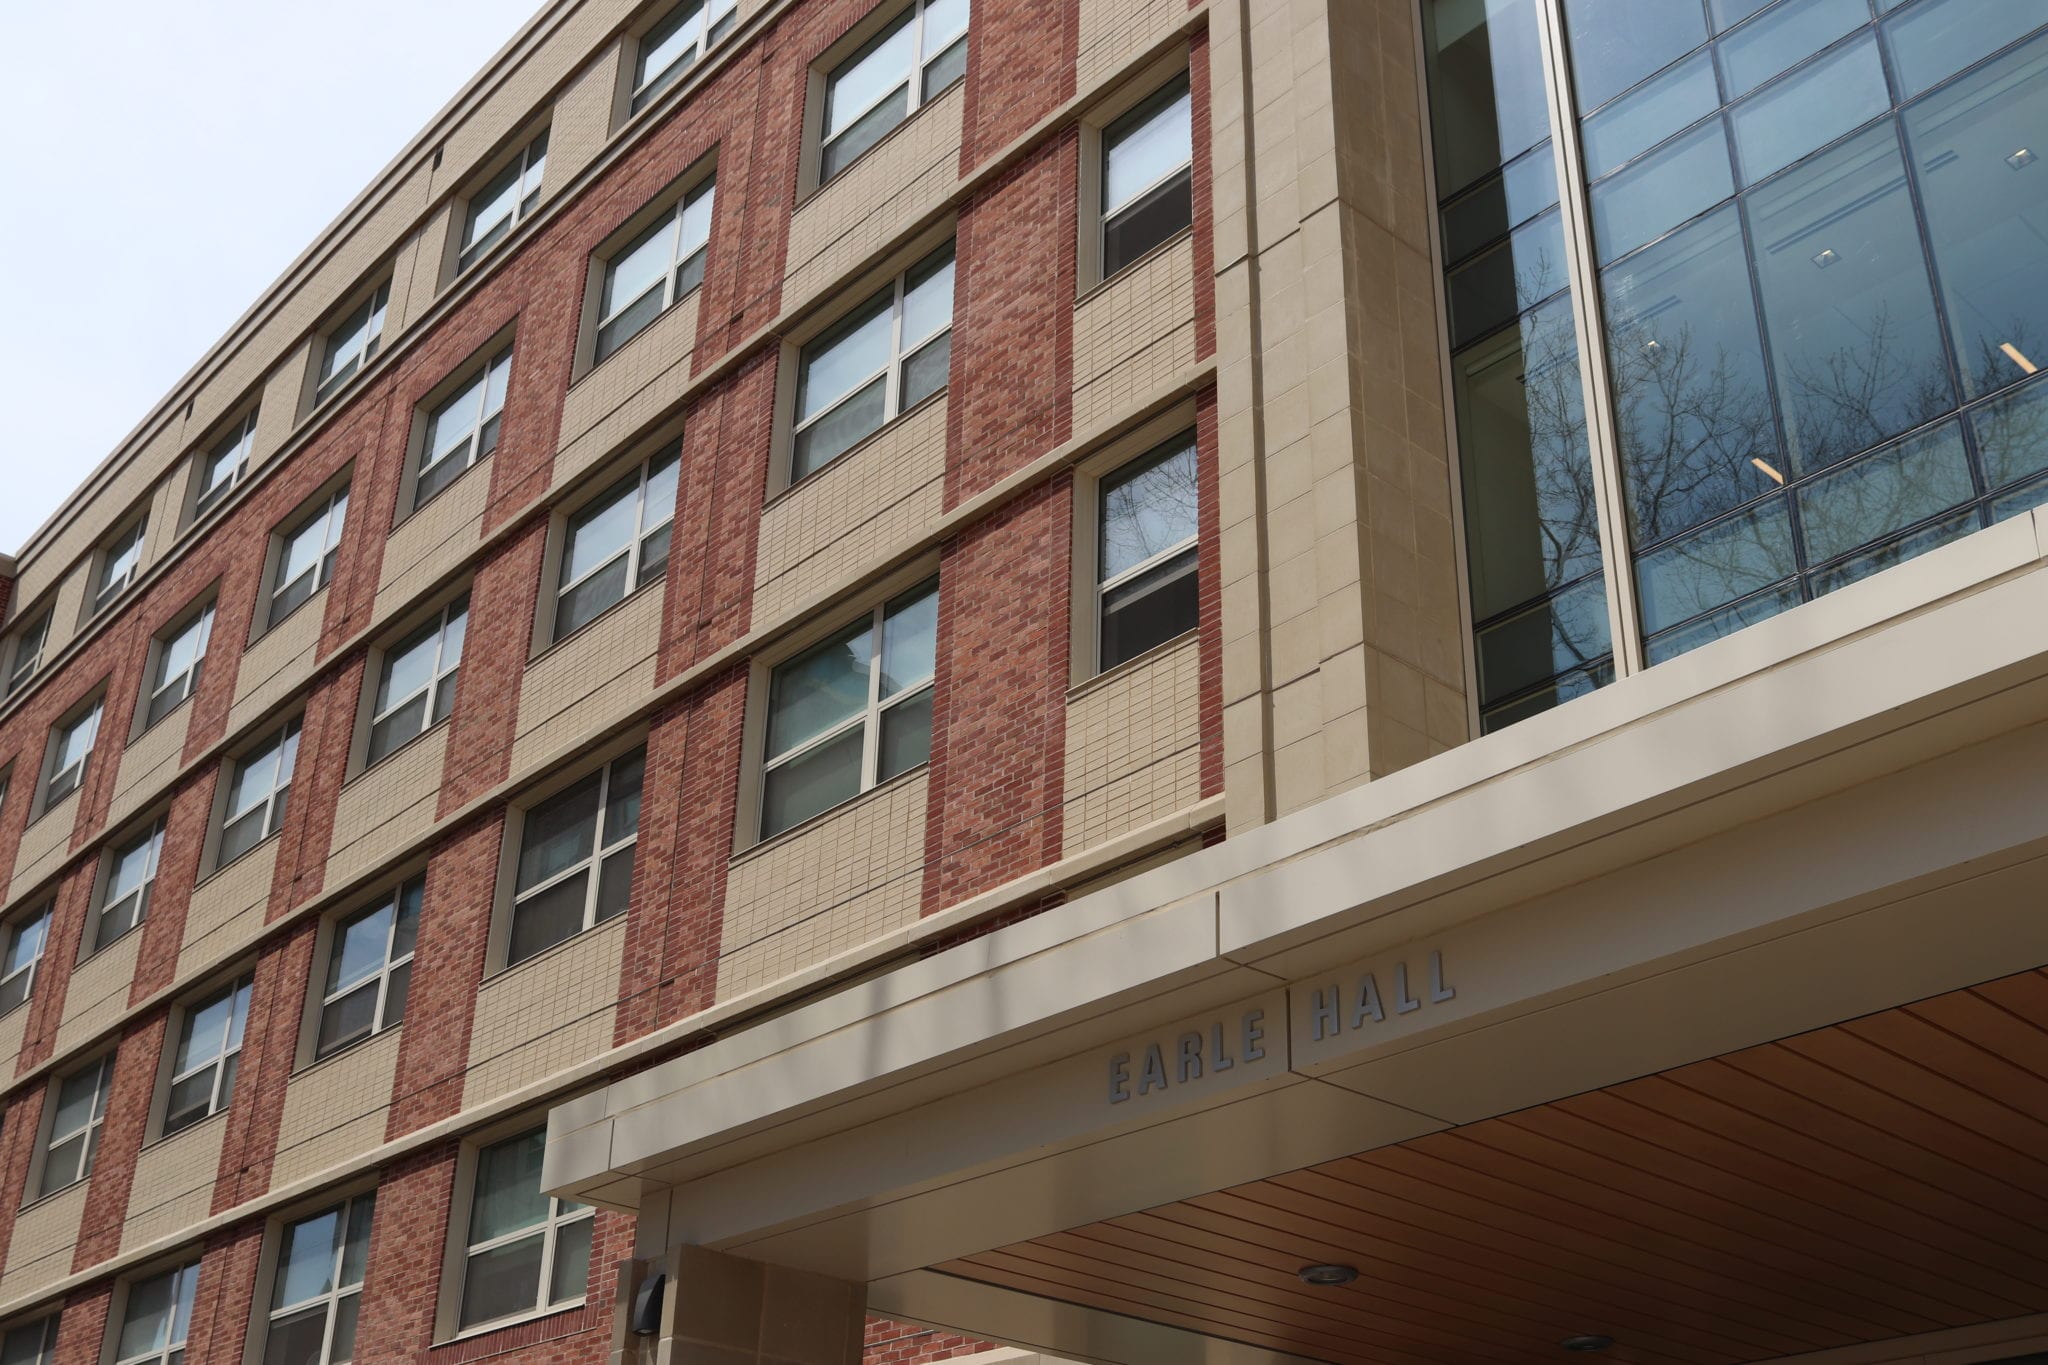 Students in Two More Penn State Residence Halls Advised to Get Tested